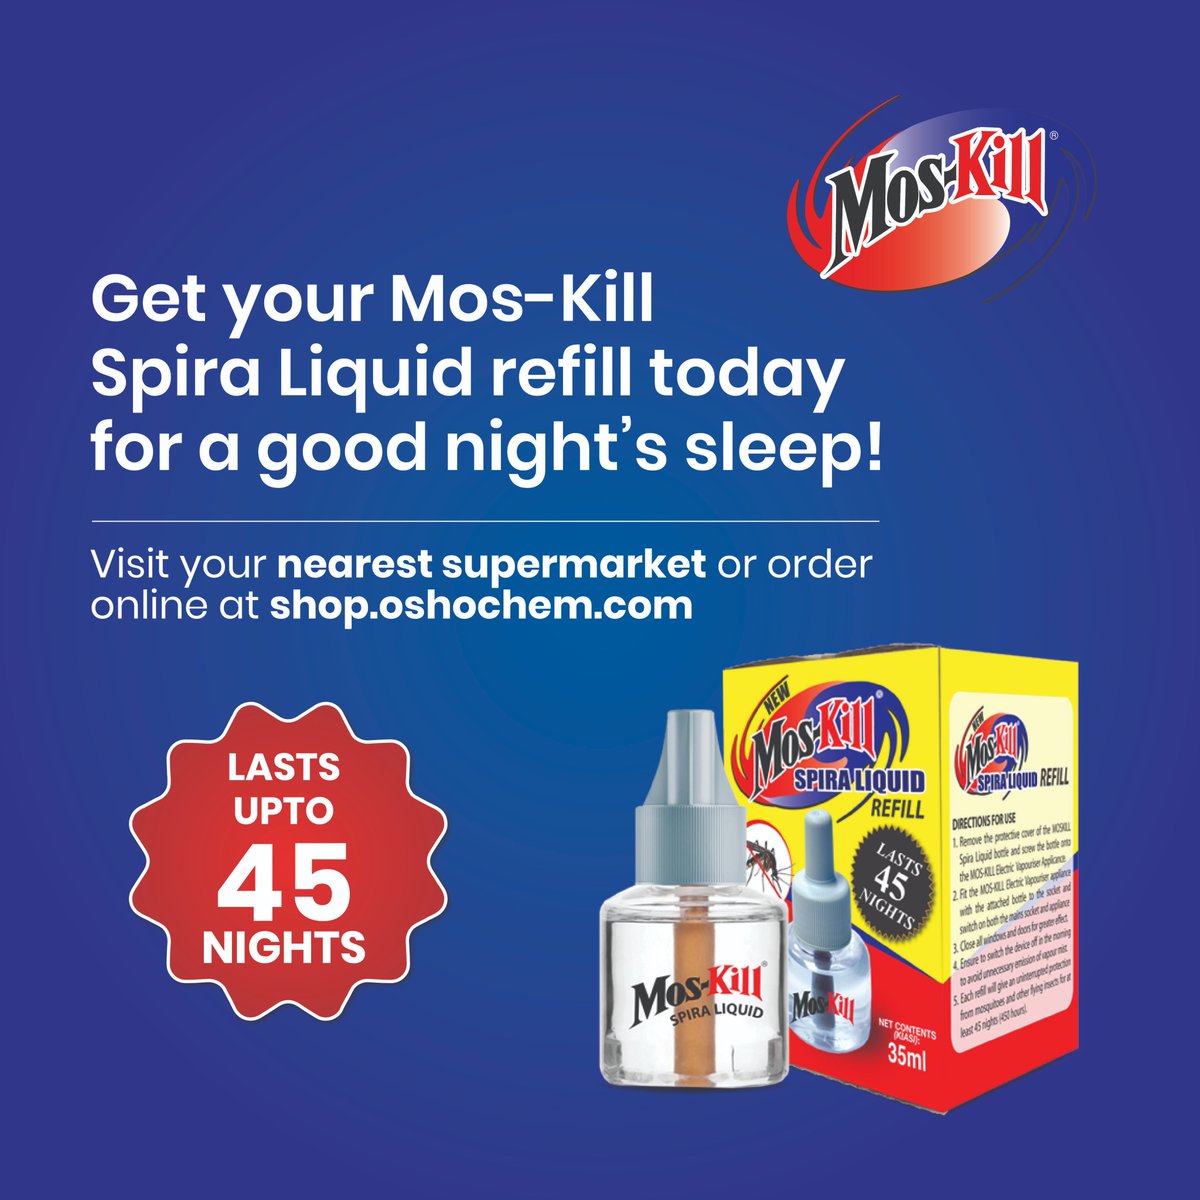 Mos-Kill Spira Liquid refills are readily available in all leading supermarkets. Get yours today and continue to enjoy peaceful nights.